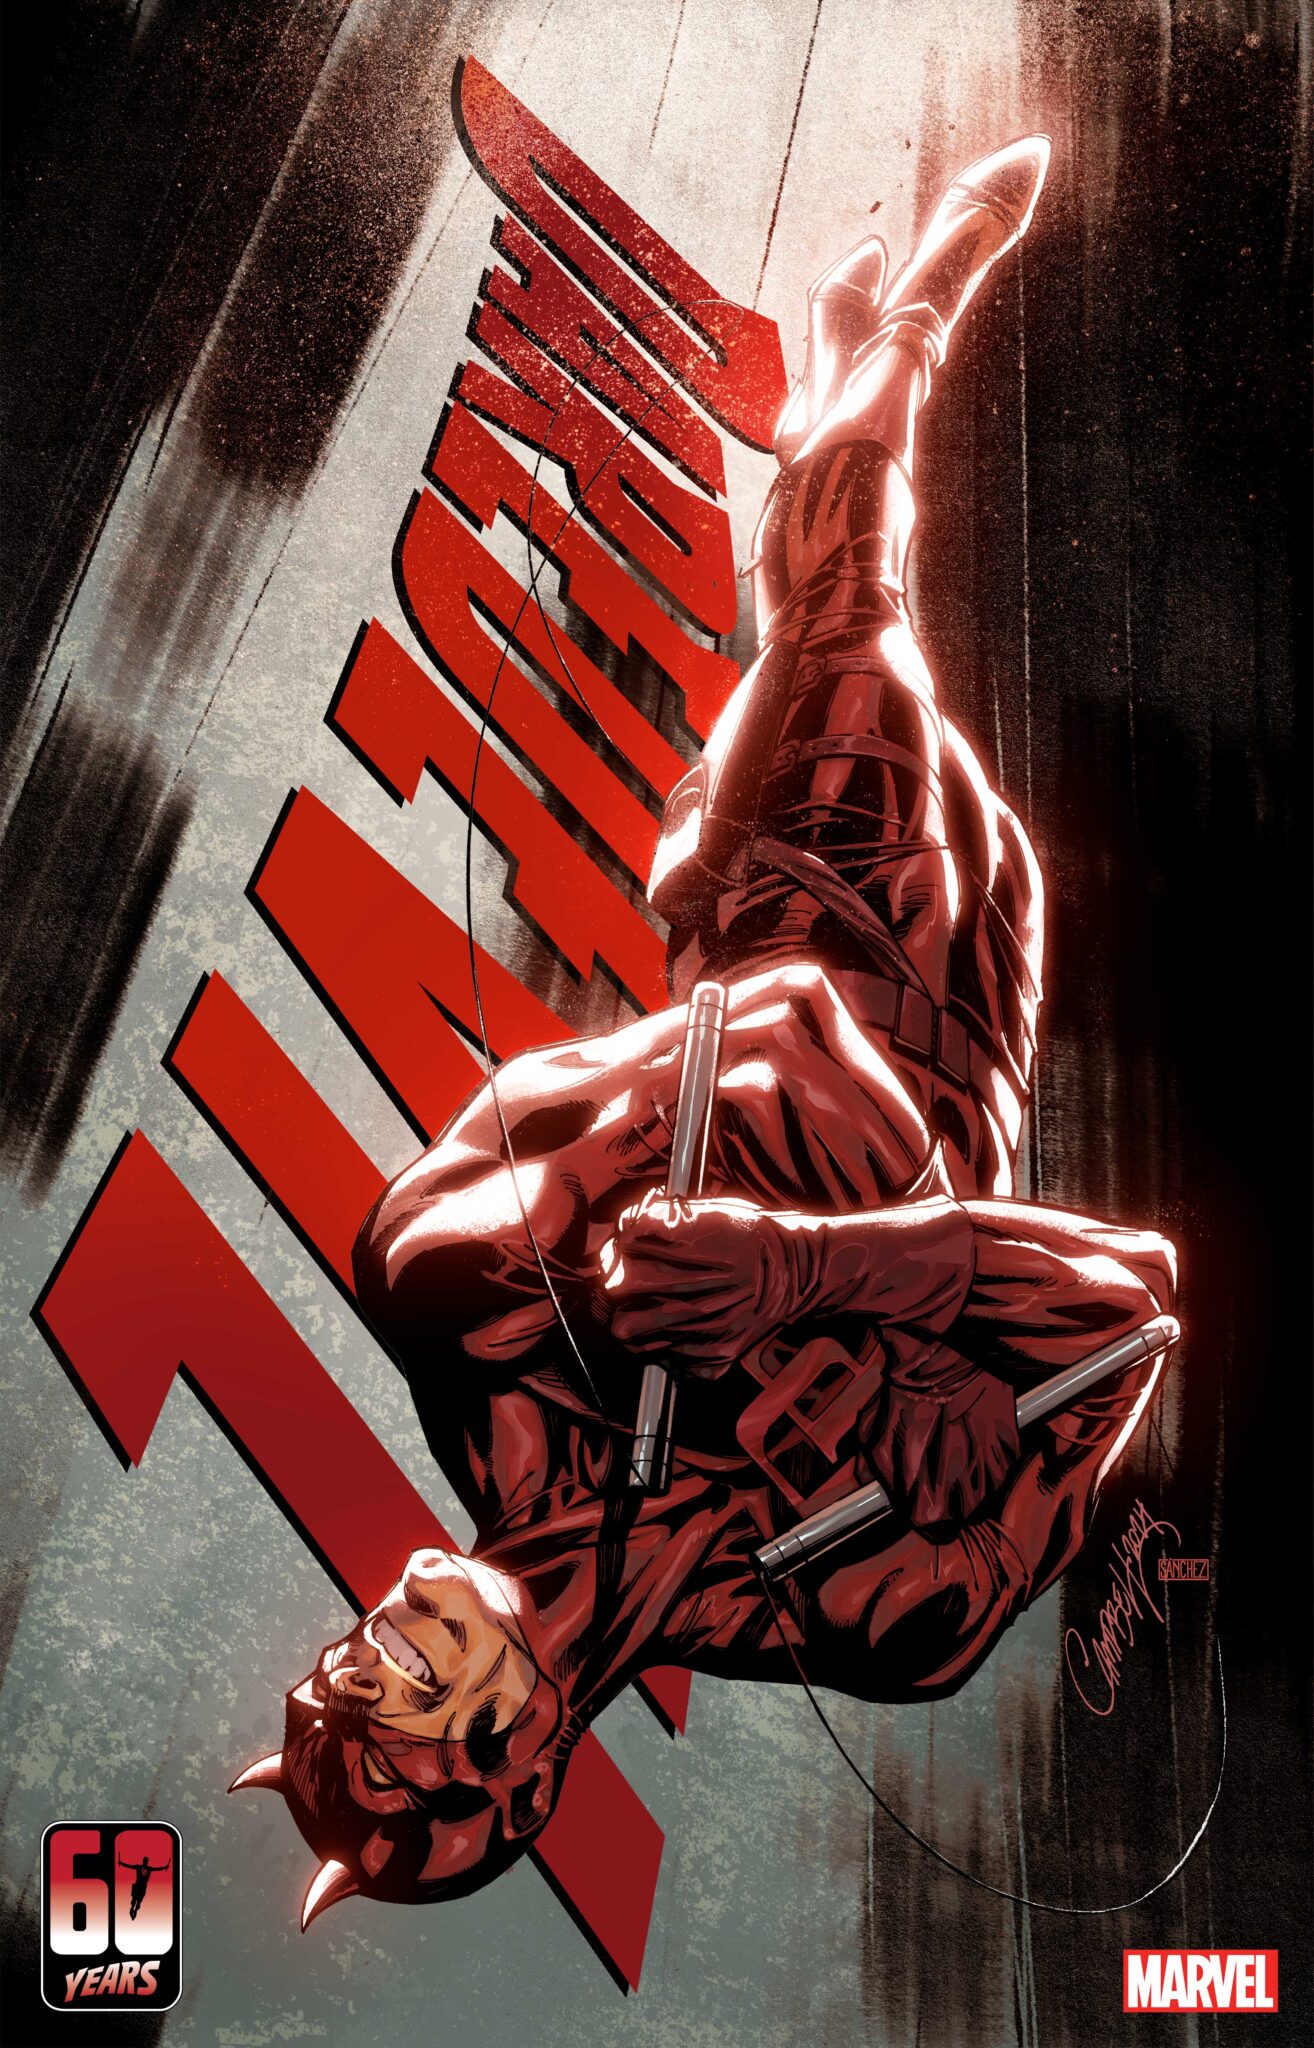 Daredevil #8 Variant Cover by J. SCOTT CAMPBELL 